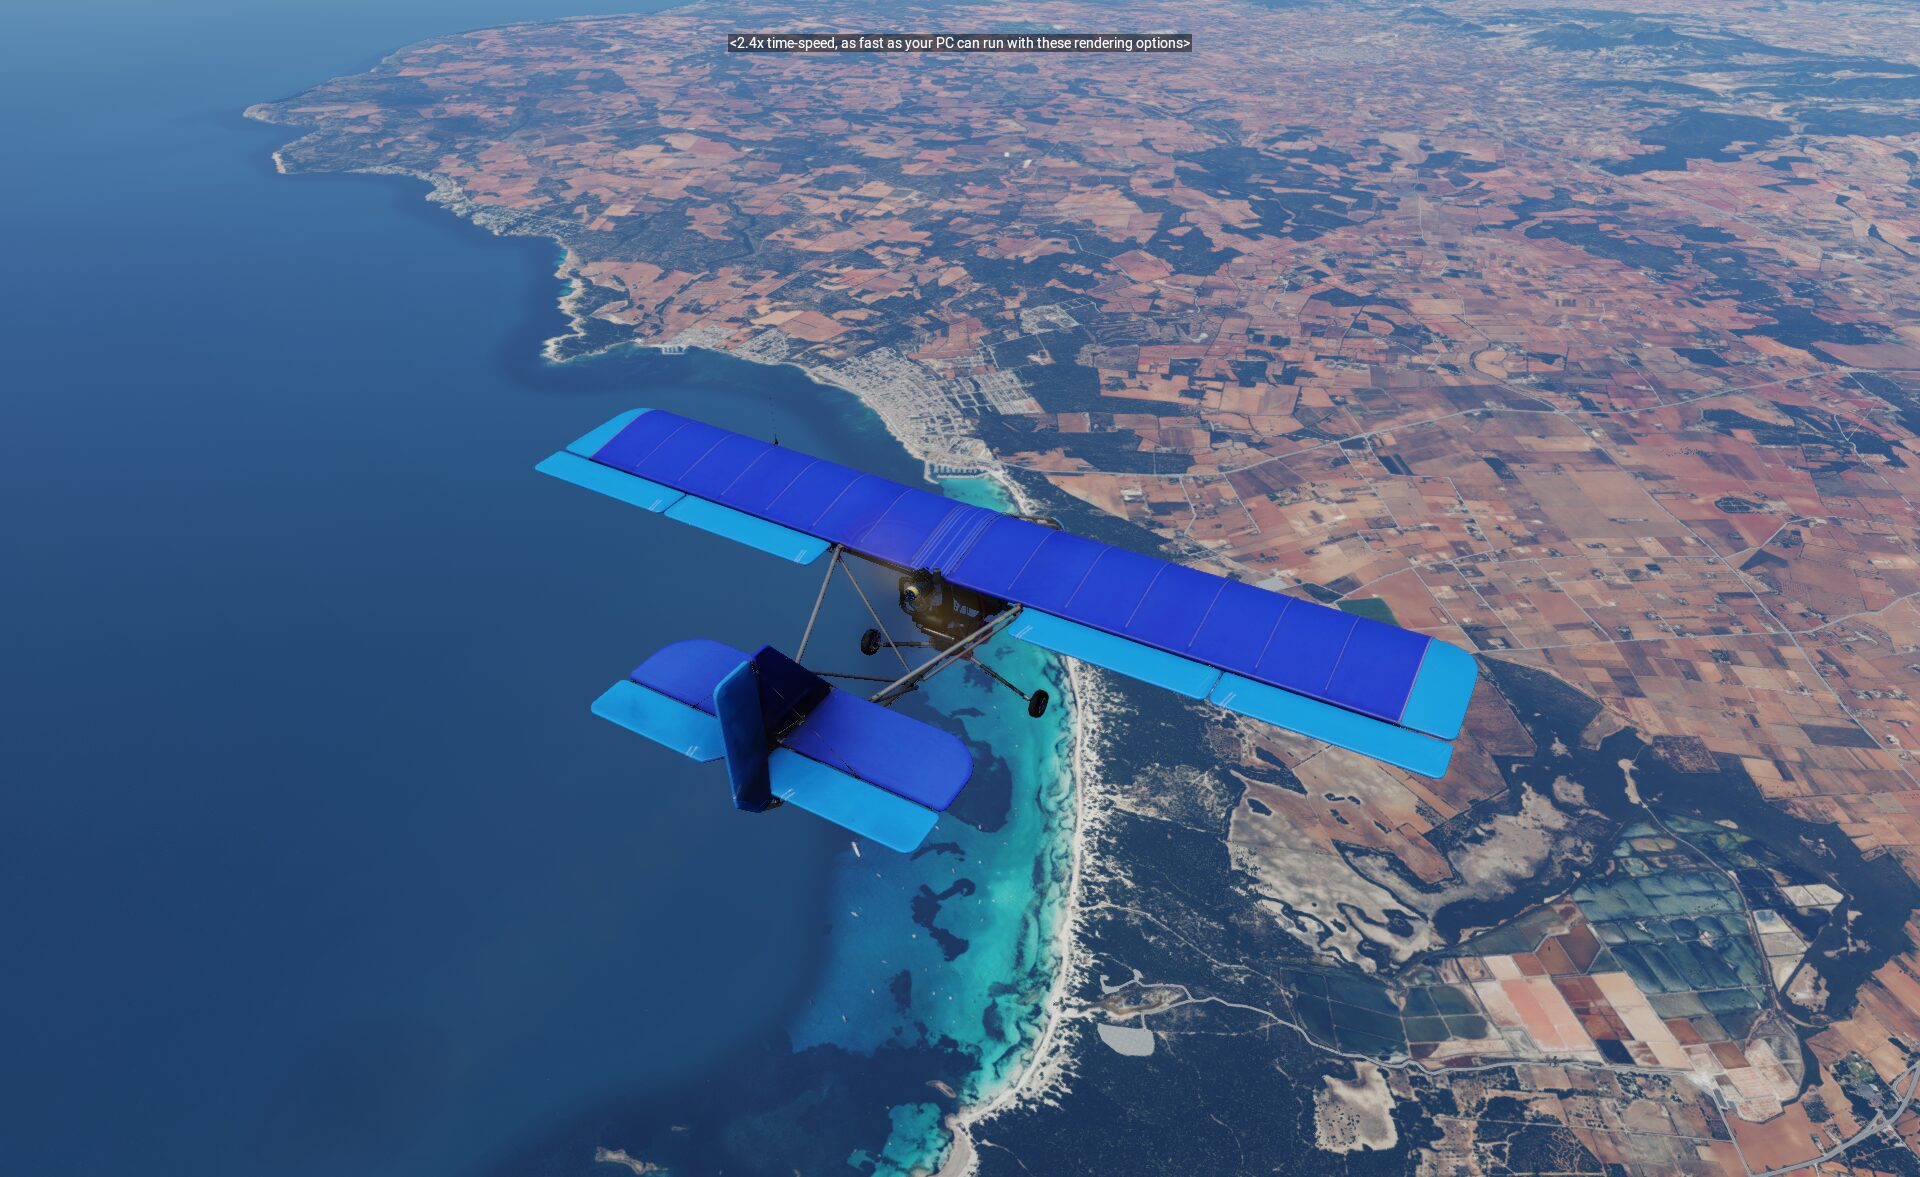 More information about "ORTHOPHOTO Mallorca ZL18 1.0.0"